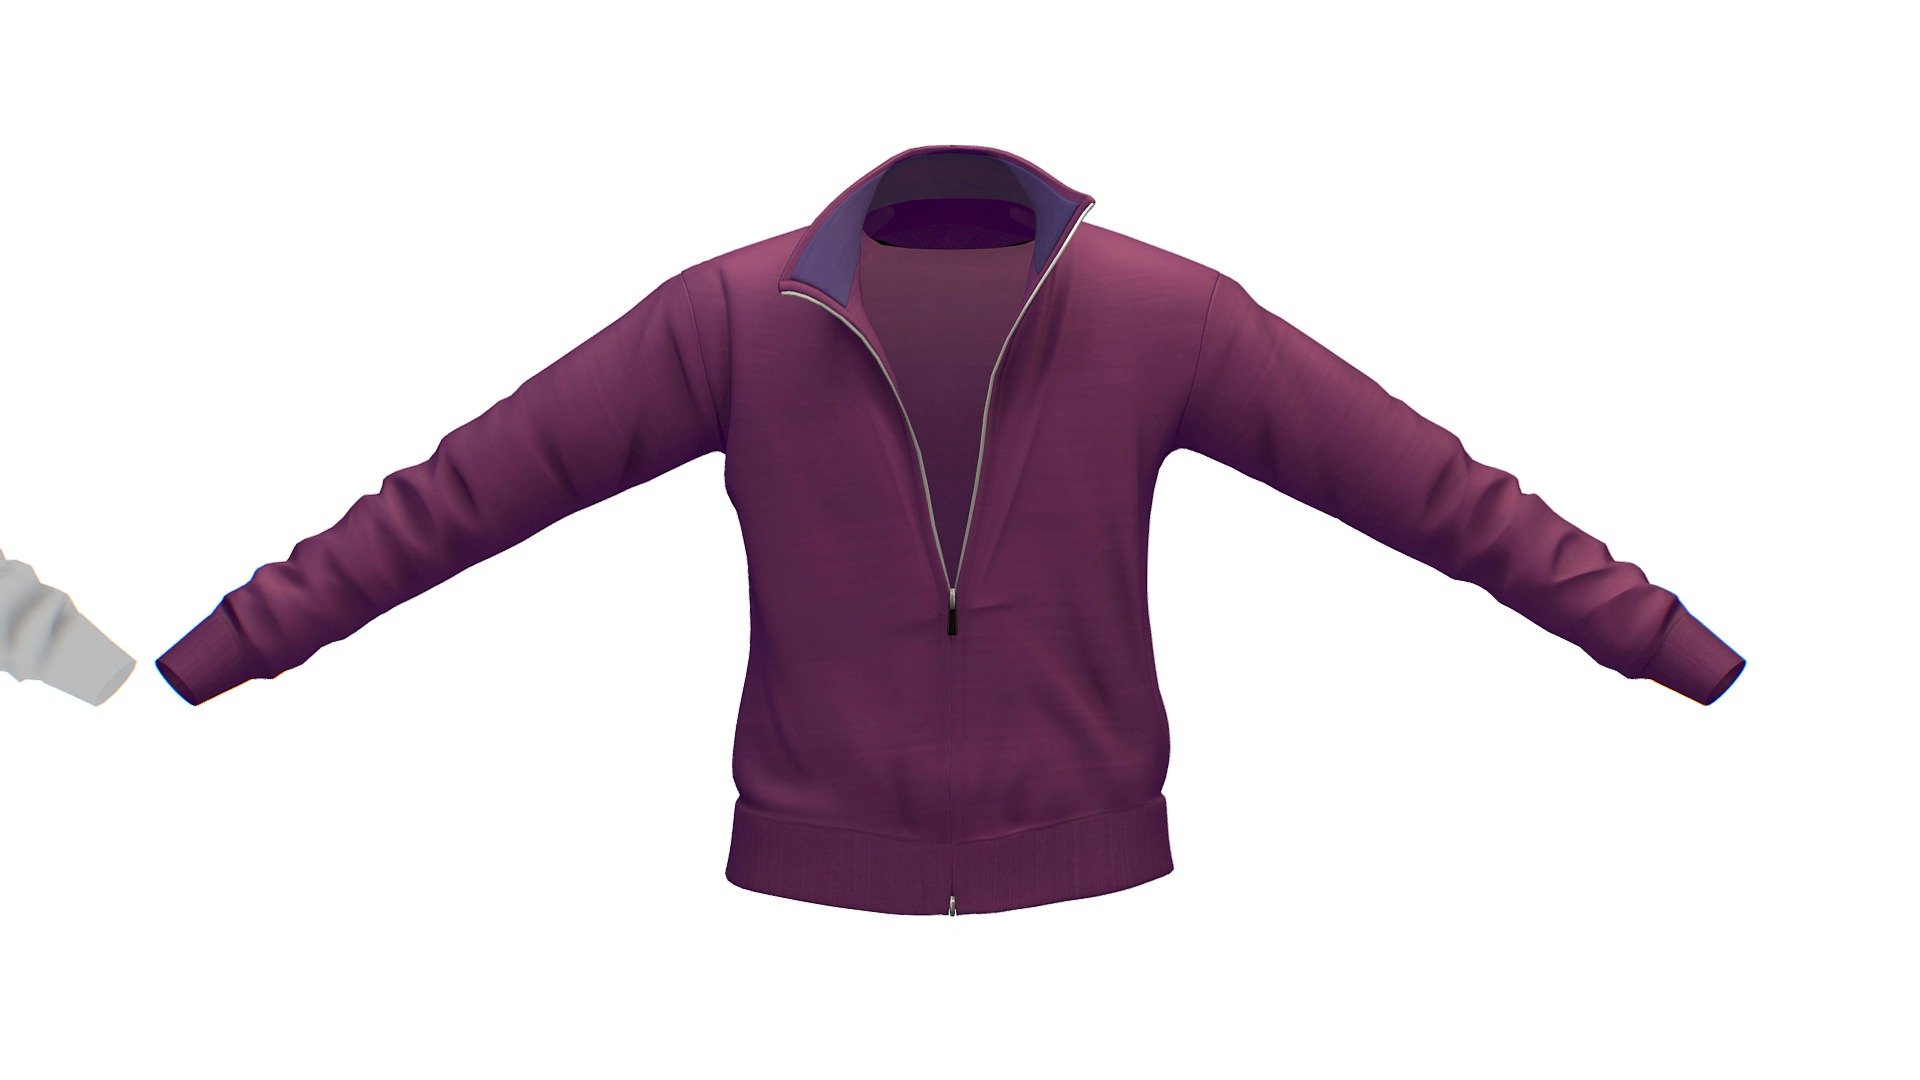 Cartoon High Poly Subdivision Purple Jacket

No HDRI map, No Light, No material settings - only Diffuse/Color Map Texture (2400x2400)

More information about the 3D model: please use the Sketchfab Model Inspector - Key (i) - Cartoon High Poly Subdivision Purple Jacket - Buy Royalty Free 3D model by Oleg Shuldiakov (@olegshuldiakov) 3d model